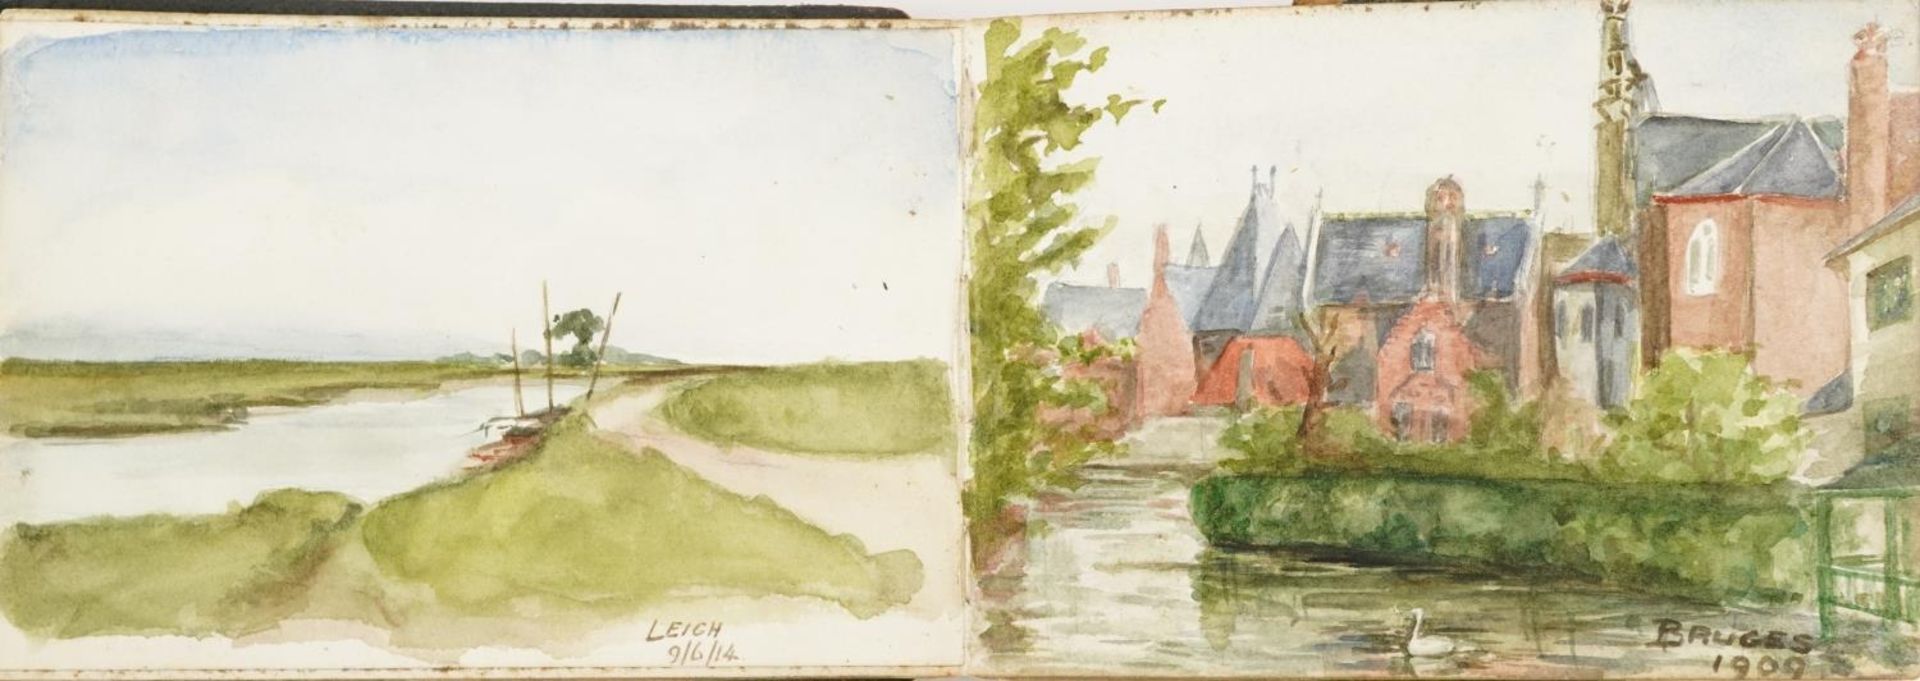 Early 20th century artist's travel sketchbook housing various watercolours and pencil sketches - Image 6 of 15